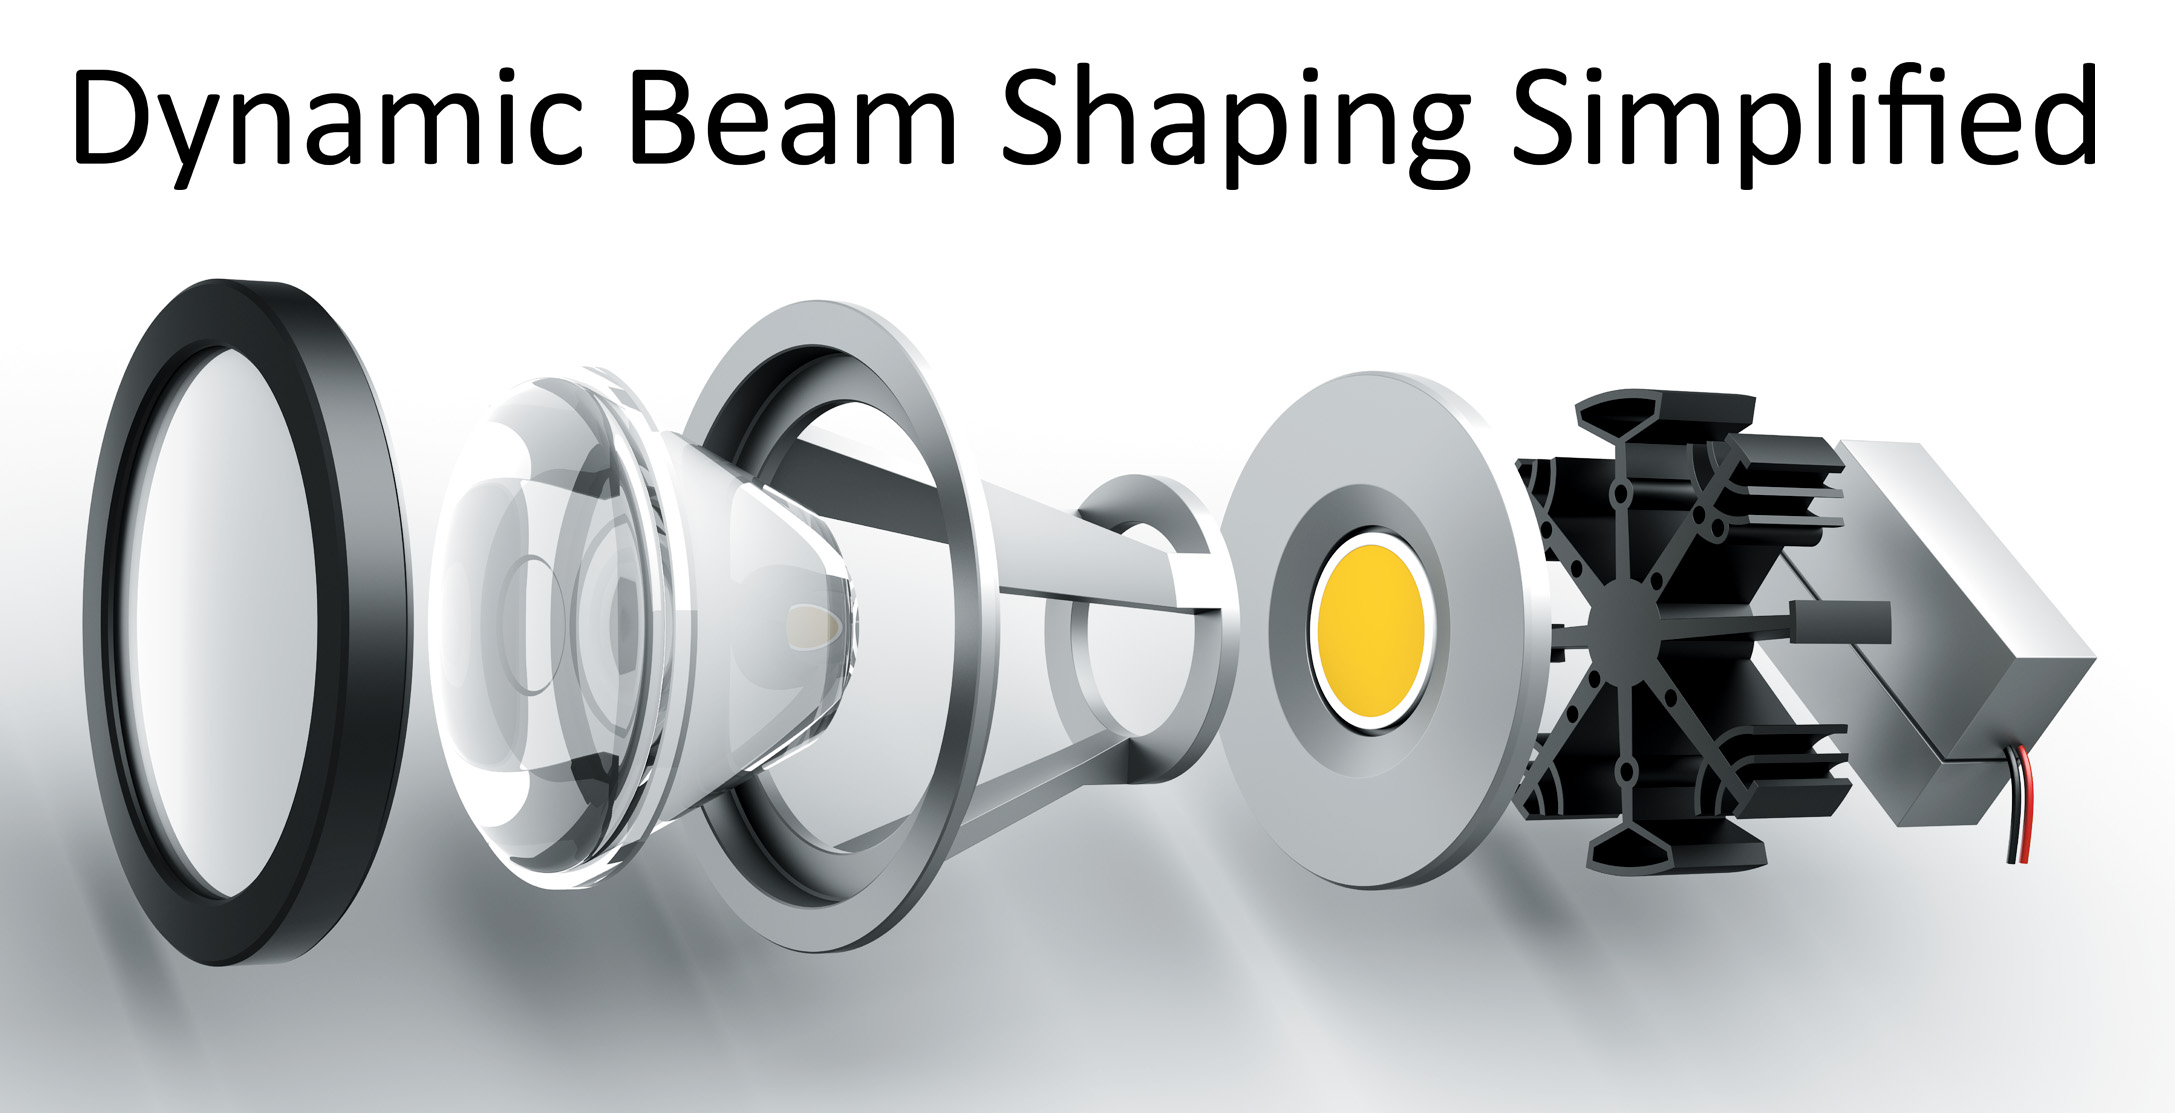 Dynamic Beam Shaping Simplified